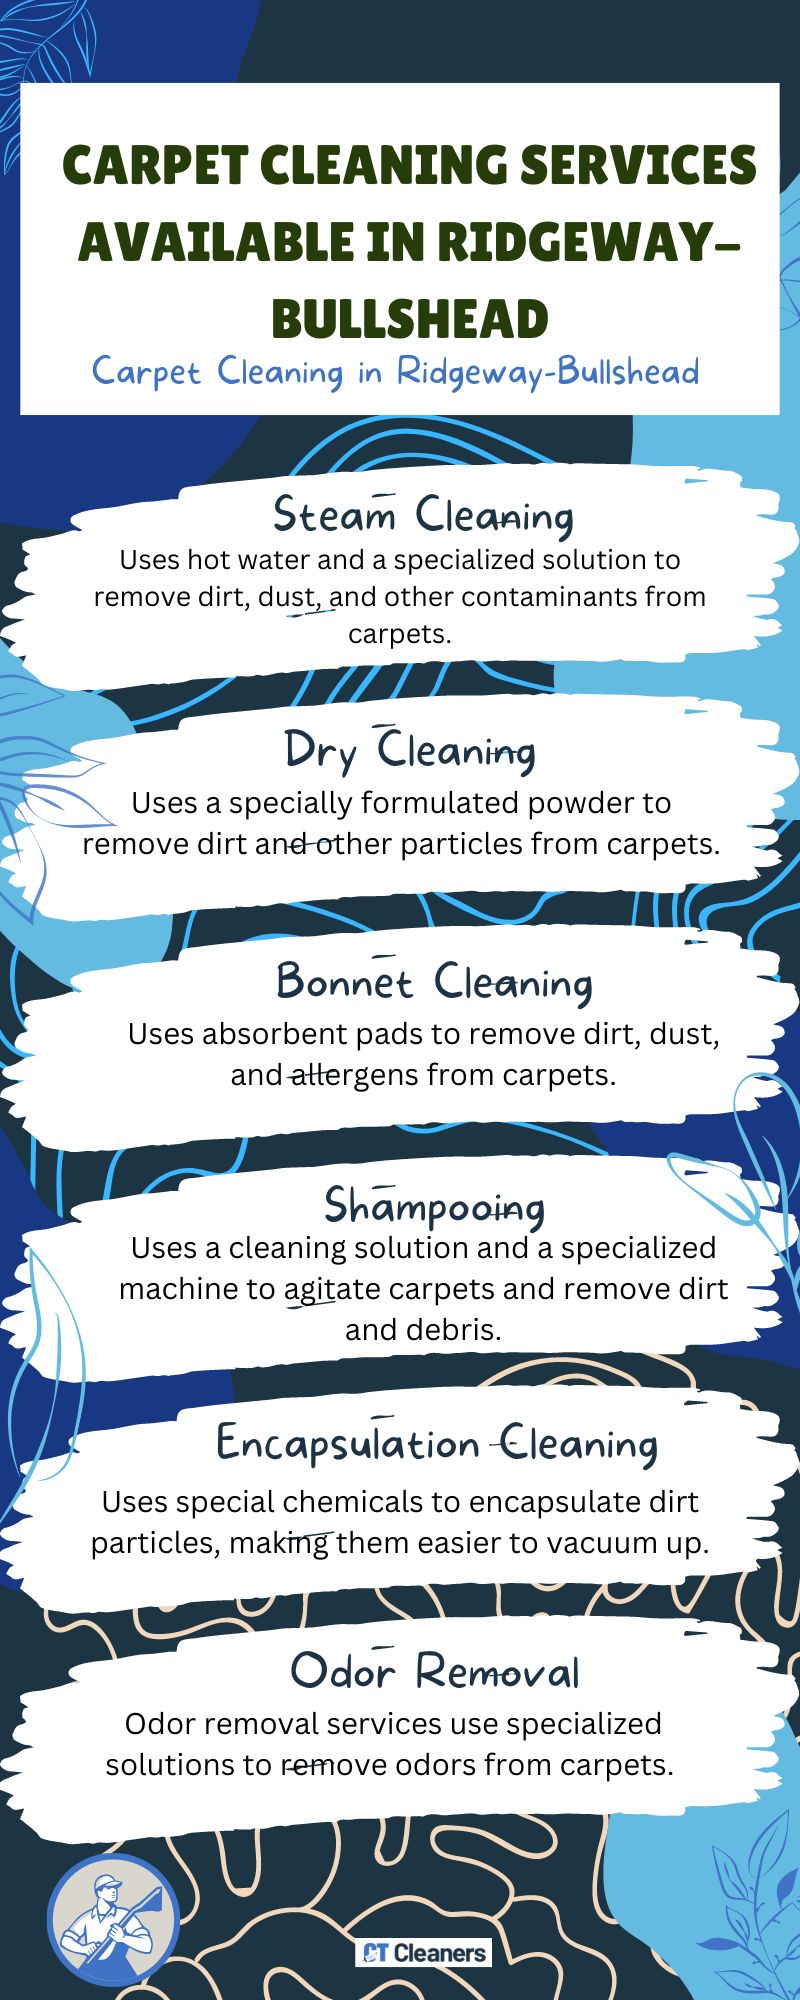 Carpet Cleaning Services Available in Ridgeway-Bullshead